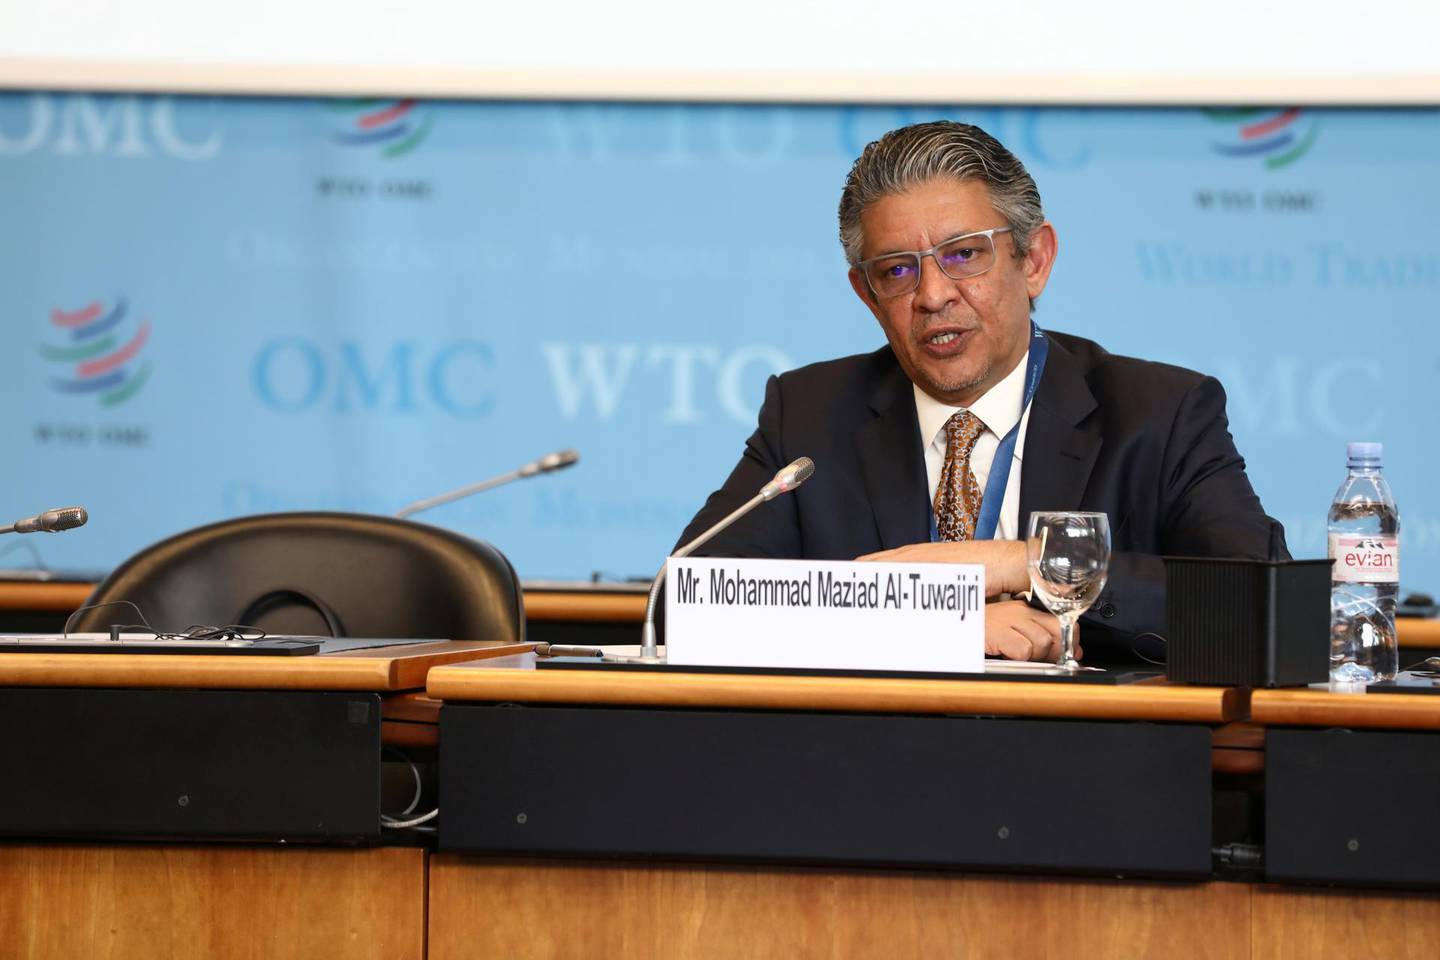 Saudi Arabia's candidate for General Director of the World Trade Organization (WTO) Mohammad Maziad Al-Tuwaijri attends the General Council meeting during the WTO Director General election process, as the spread of the coronavirus disease (COVID-19) continues, in Geneva, Switzerland July 17, 2020. WTO/Jay Louvion/Handout via REUTERS THIS IMAGE HAS BEEN SUPPLIED BY A THIRD PARTY. NO RESALES. NO ARCHIVES. MANDATORY CREDIT.